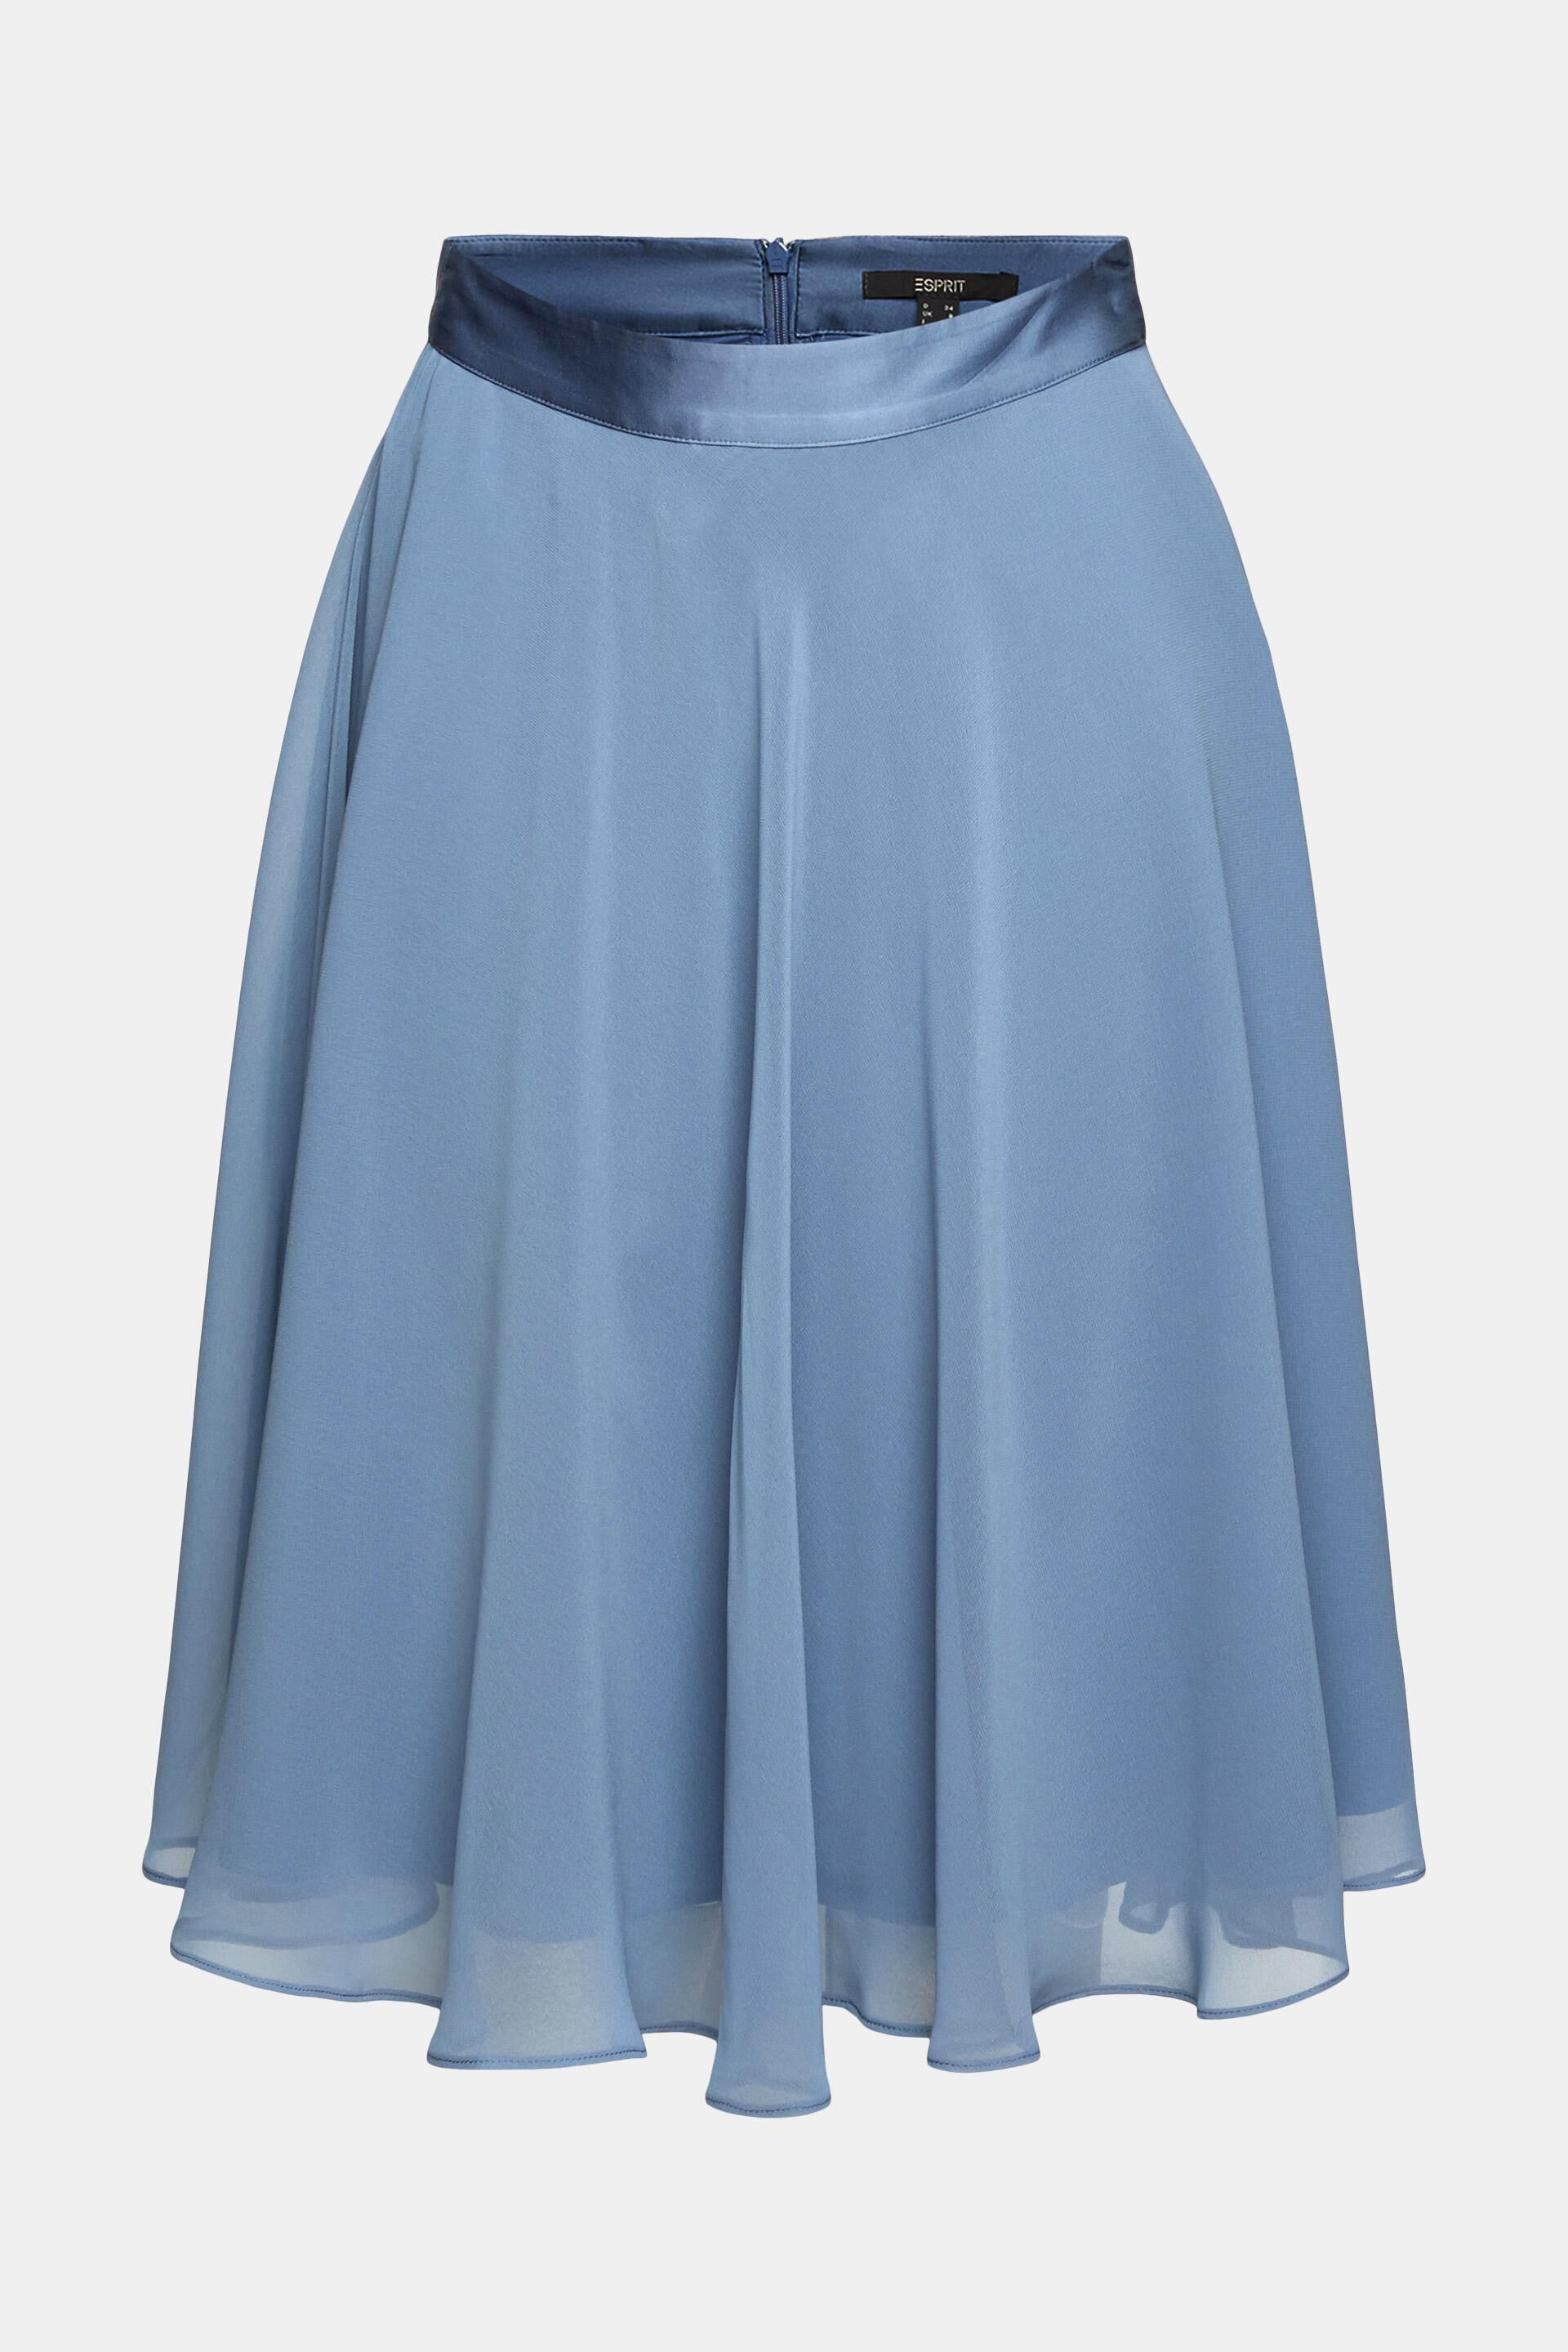 Esprit Collection 031eo1d307 Skirt in Blue Womens Skirts Esprit Skirts 